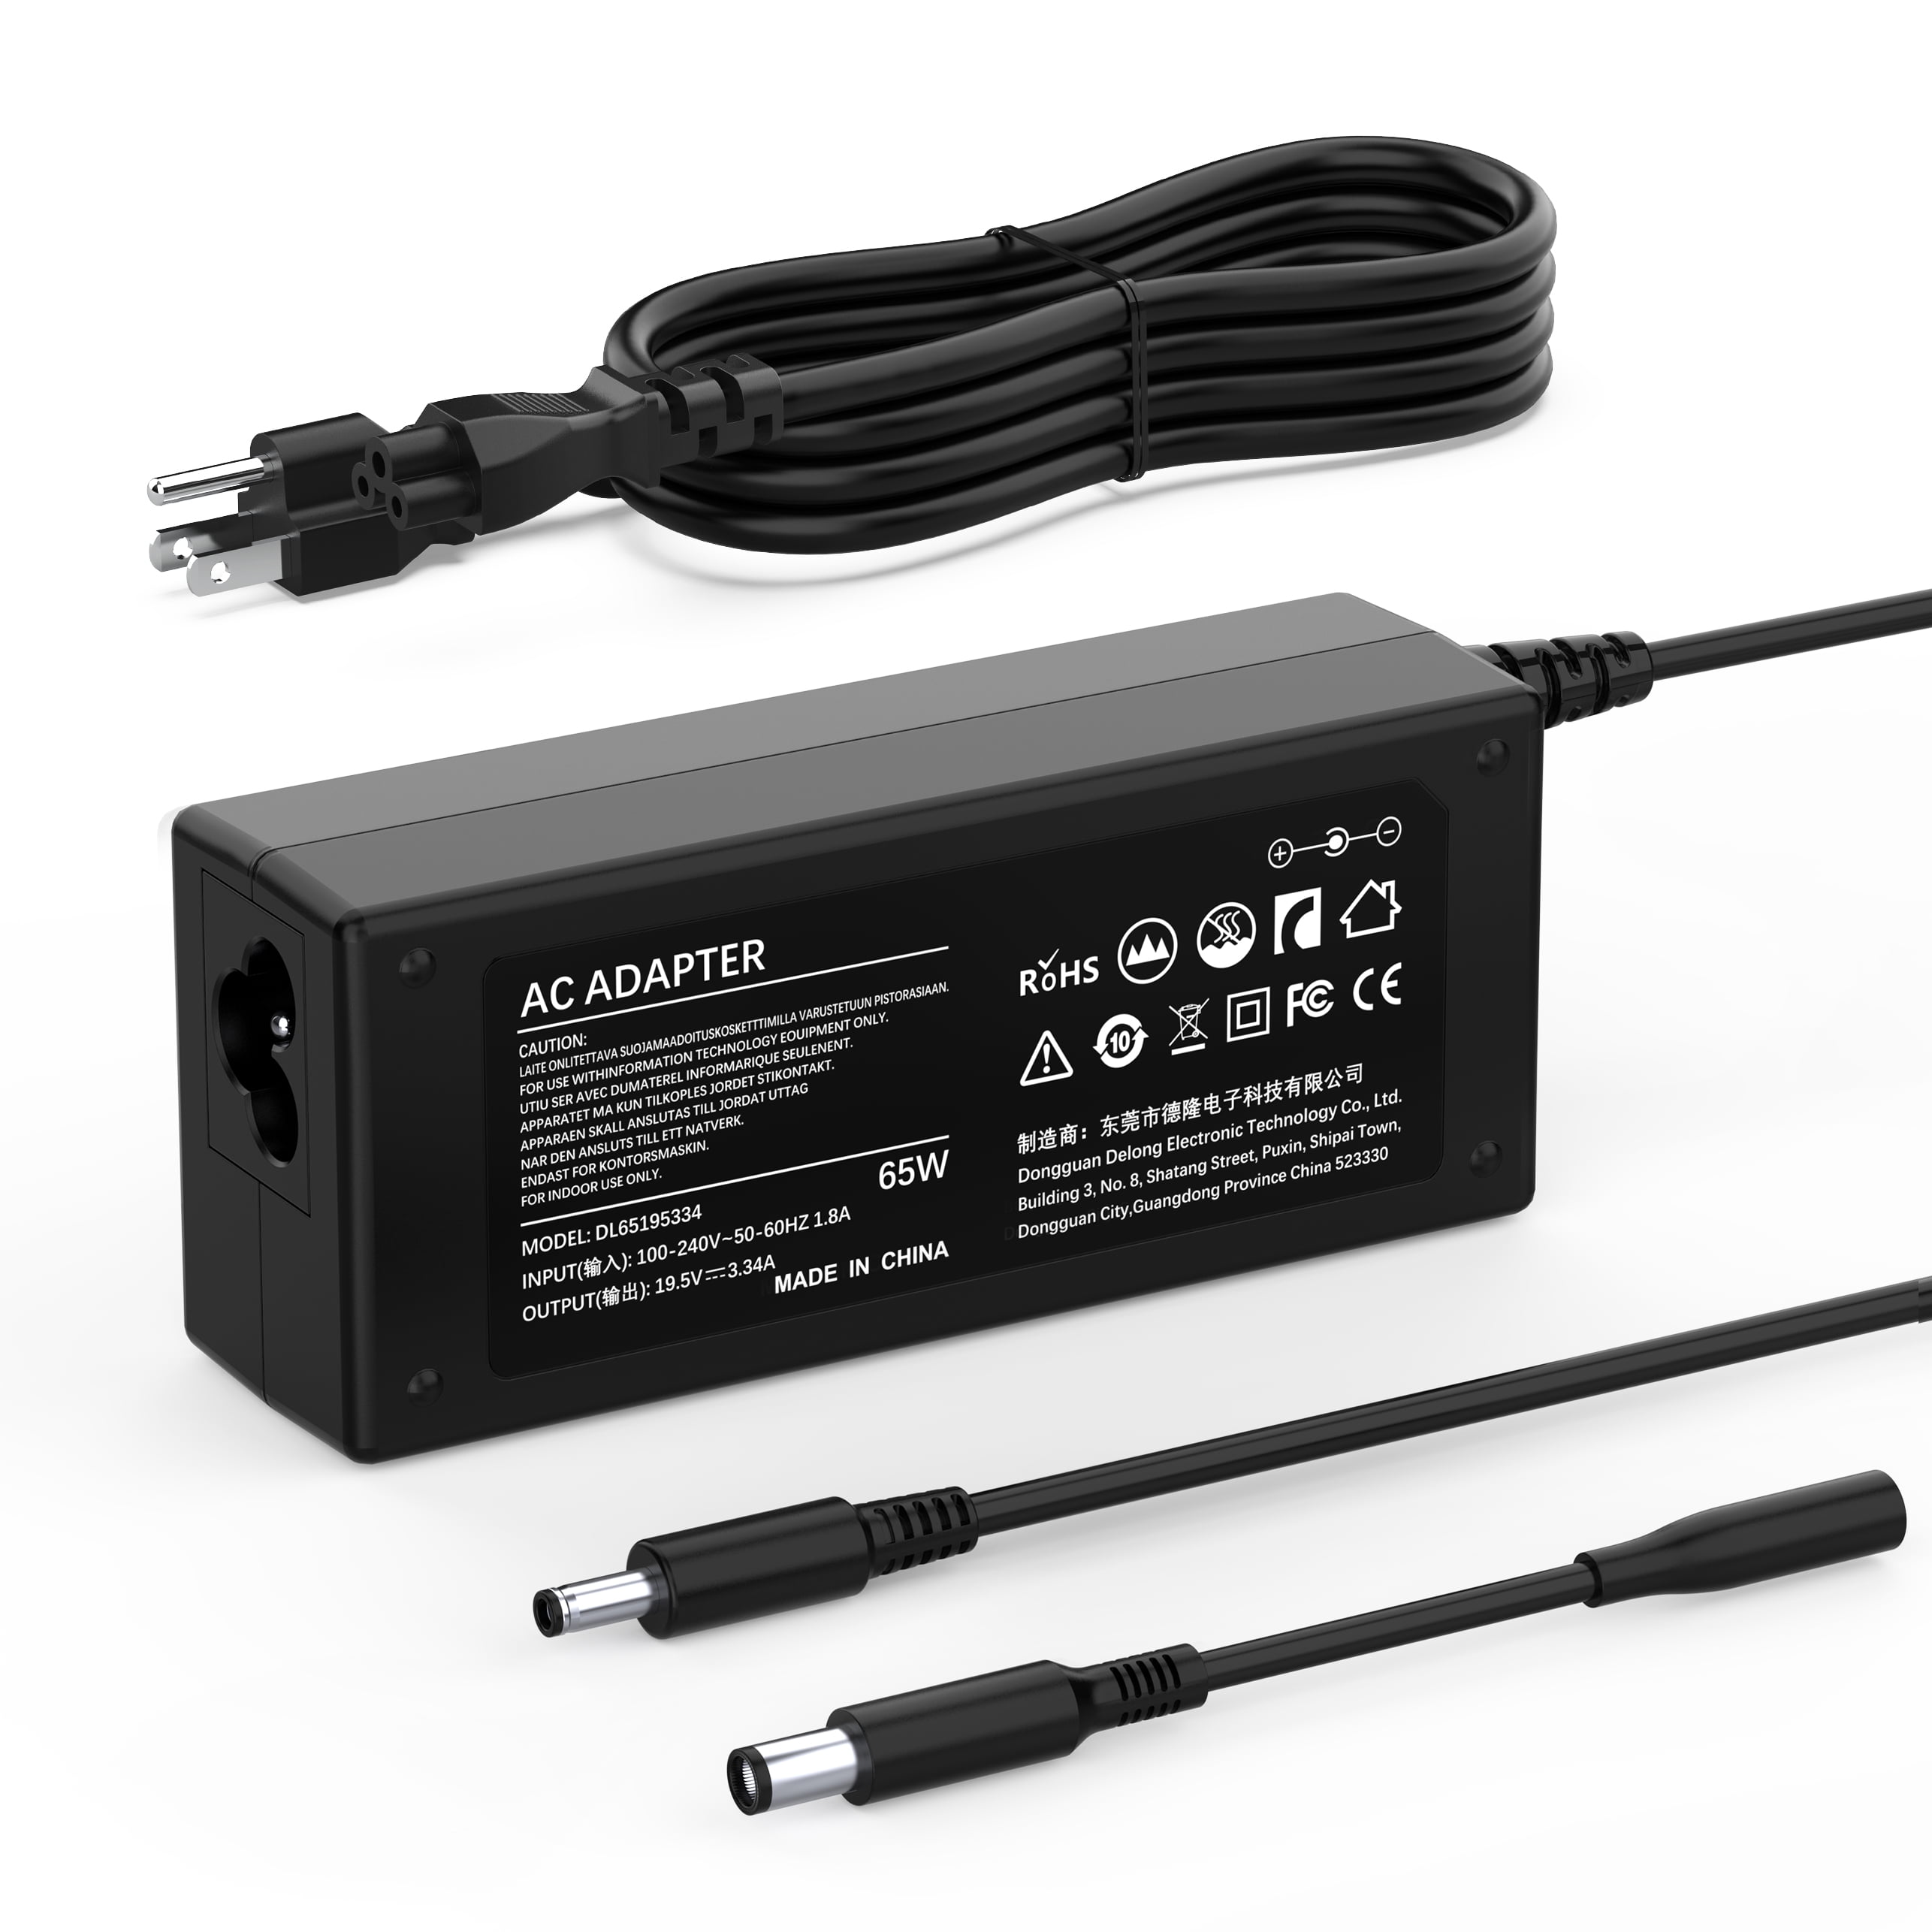 Charger for Dell Laptop Charger, Portable, 65W, 45W, for All Dell Inspiron,  Latitude, Vostro Round Power Connector, (Safety Certified by UL)